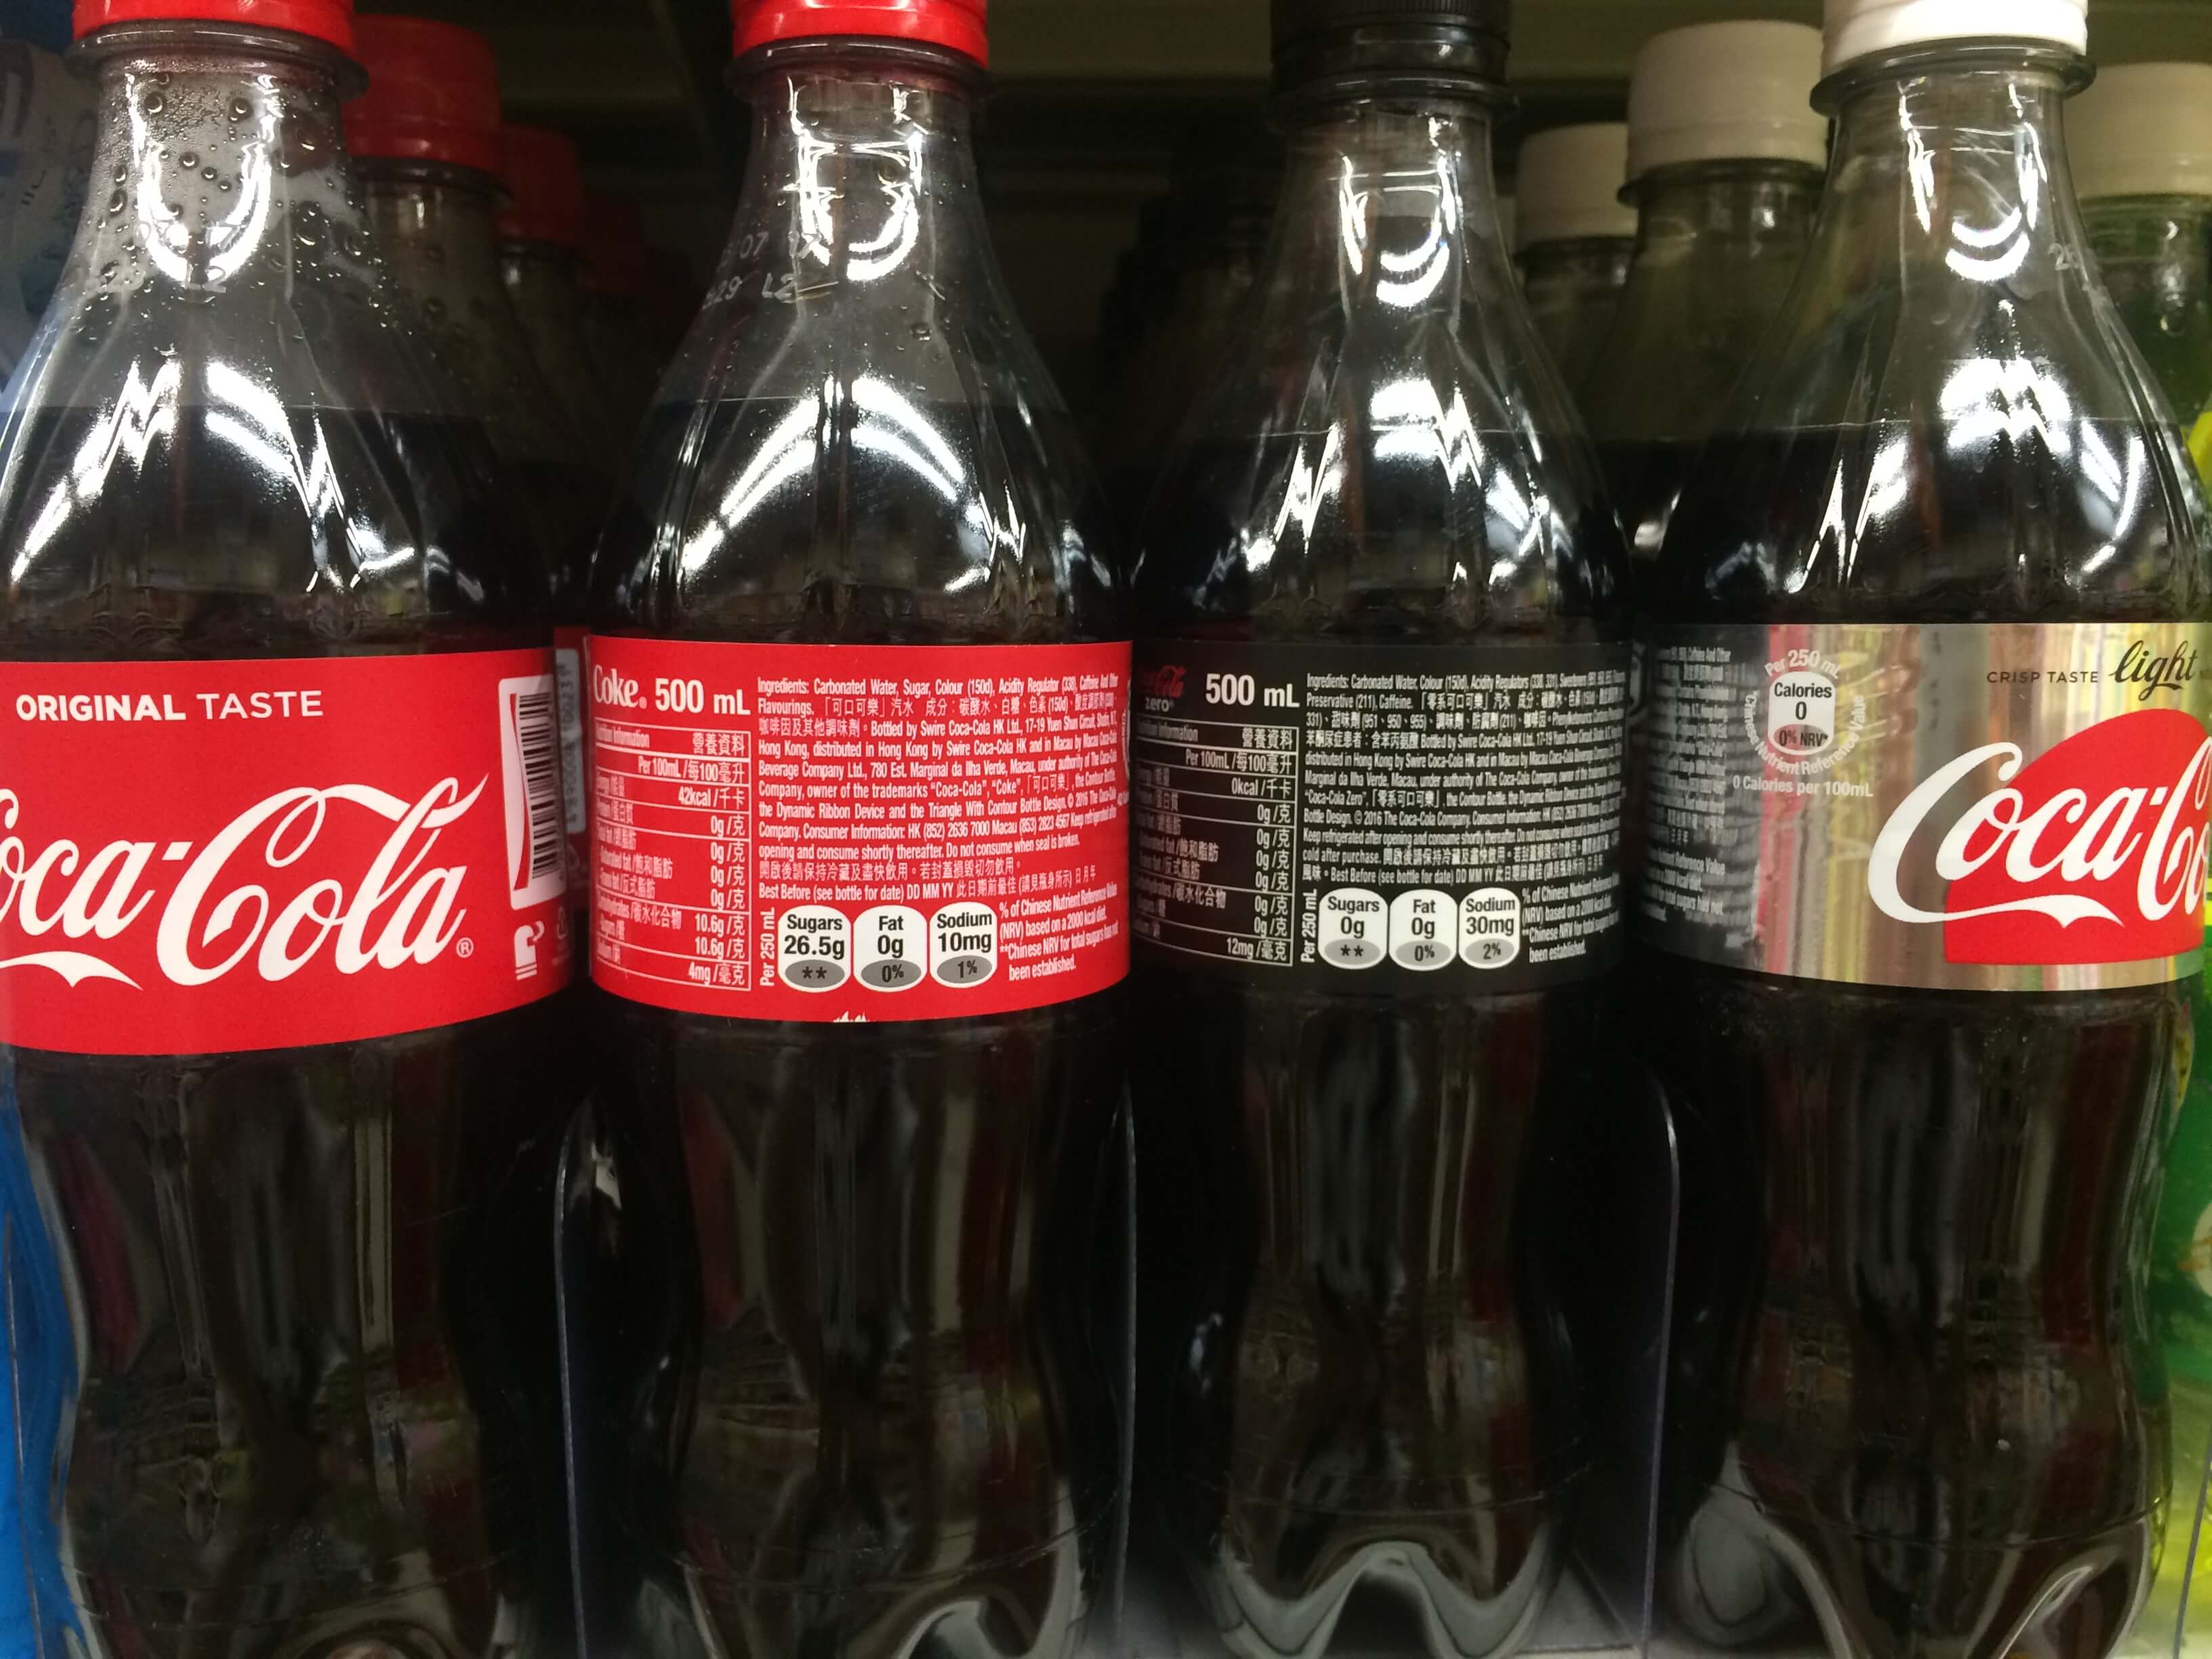 Coca-cola launched a product stet no sugar, as well as a version with 26.5g sugar every 250ml.